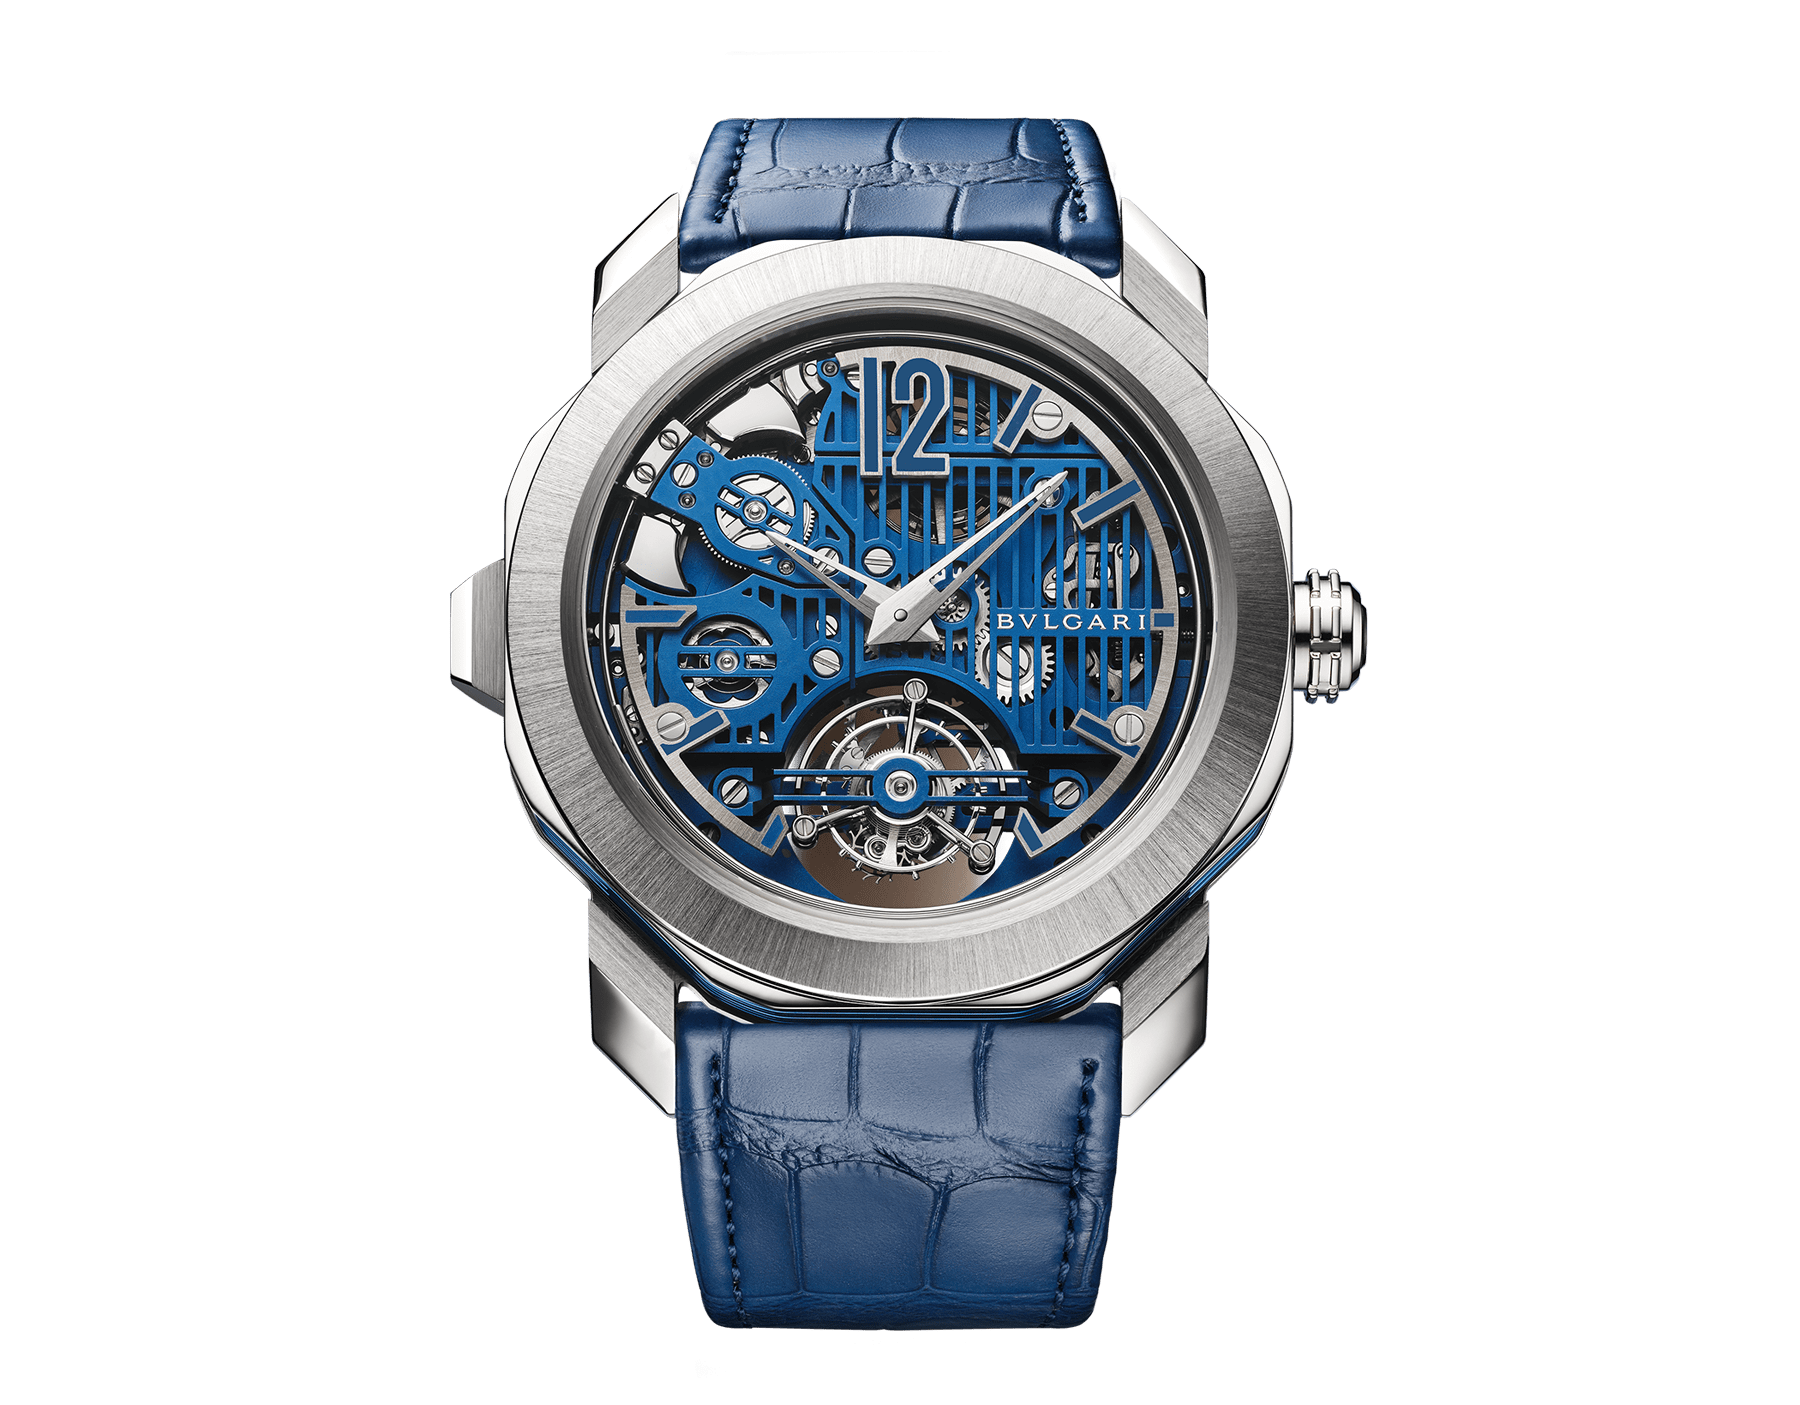 Octo Roma Carillon Tourbillon watch with mechanical manufacture movement, manual winding, openwork bridges, minute repeater, 3-hammer carillon and tourbillon. Platinum case, skeletonised dial, transparent case back and blue rubberised alligator bracelet. Water-resistant up to 30 metres. Limited edition of 30 pieces. 103627 image 1